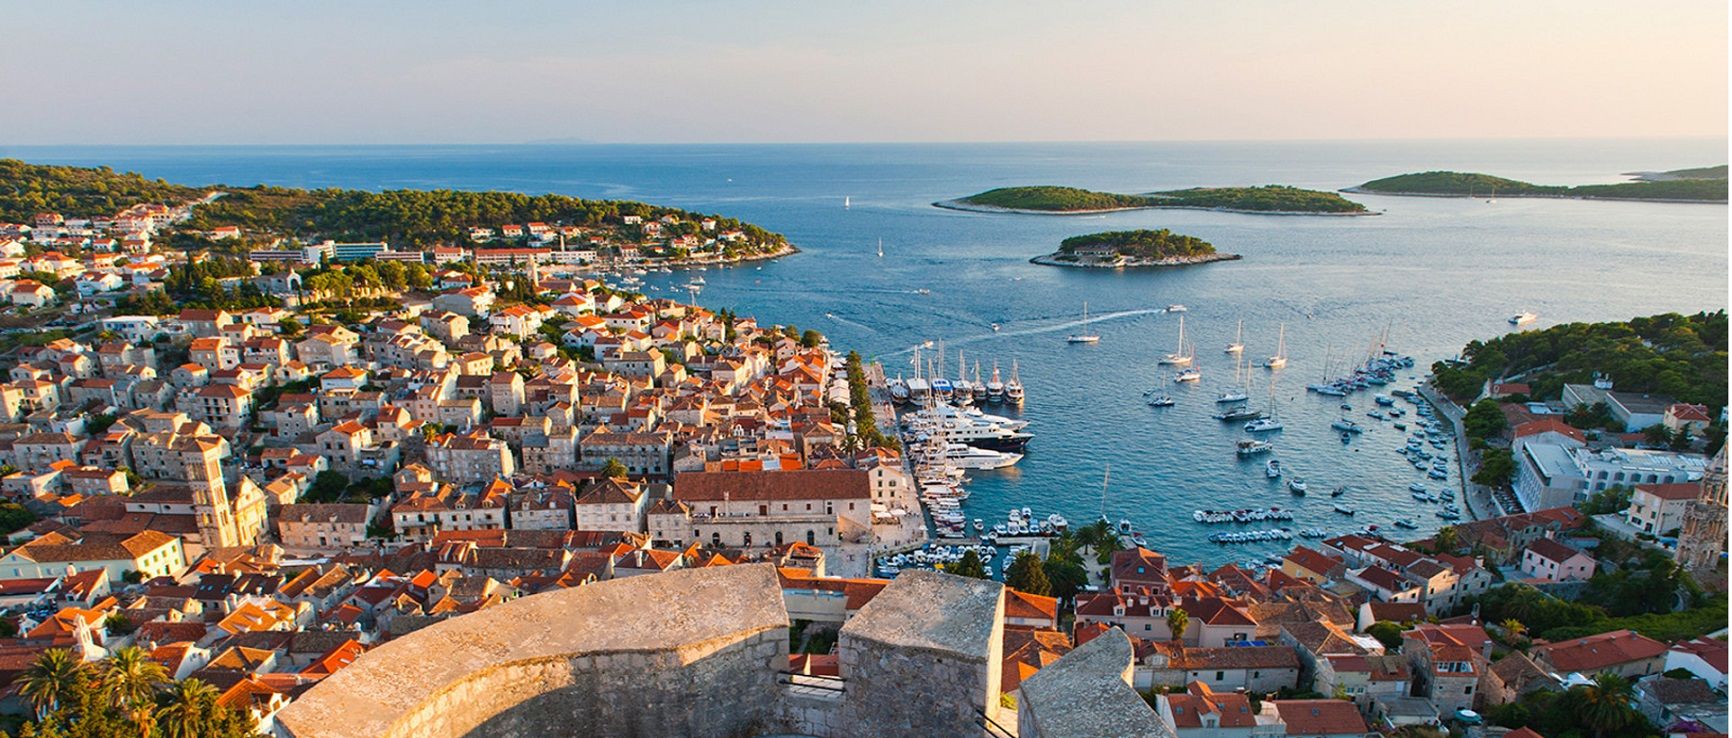 Hvar-a-beautiful-view-of-the-fortress-city-bay-islands-and-the-Adriatic-Sea-Croatia.jpg